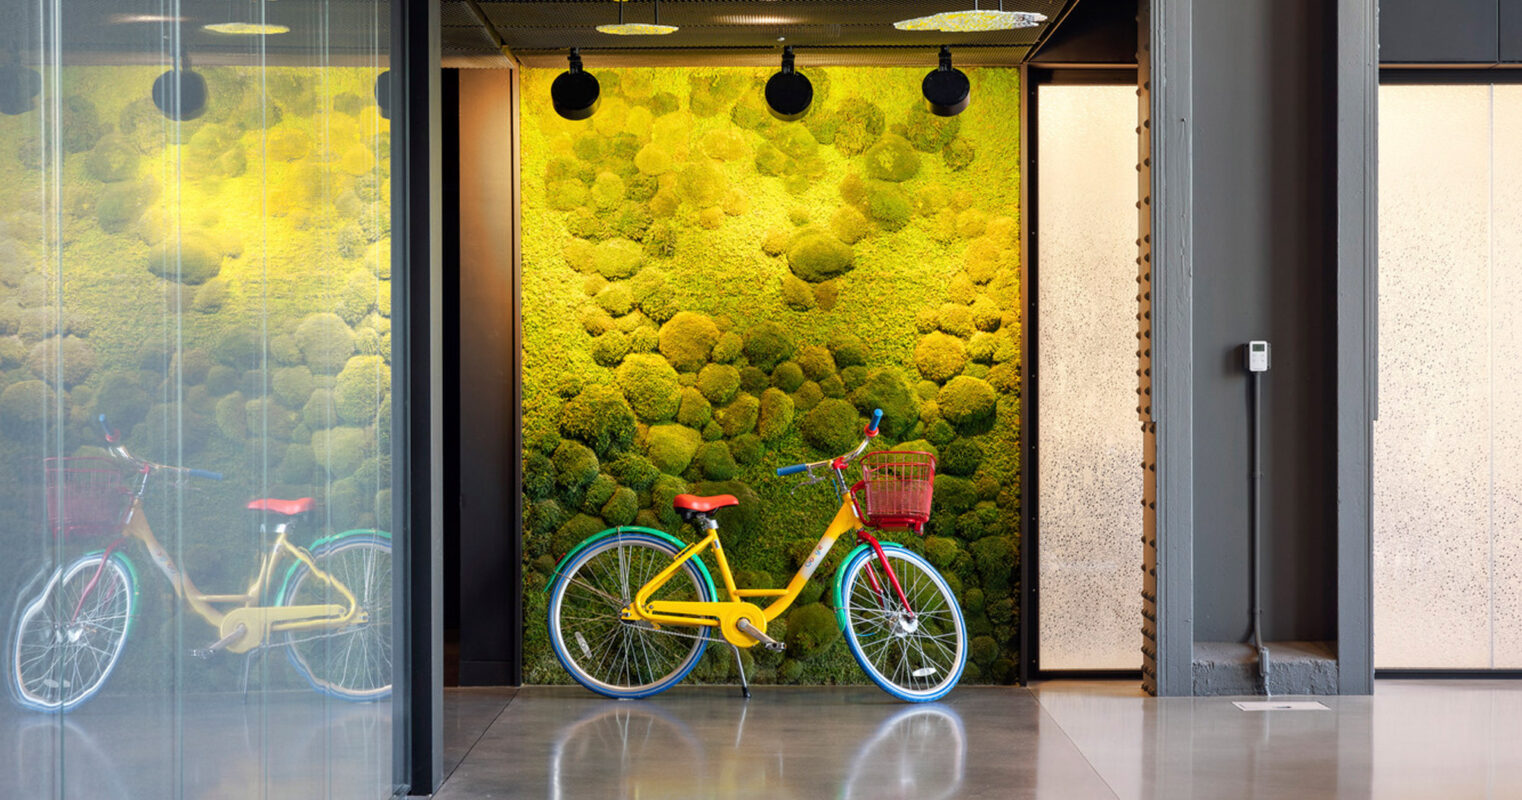 Modern office lobby featuring a vibrant green moss wall, which adds a touch of biophilic design. A bright yellow bicycle with a red basket stands out against the textured backdrop, nestled within a glass-walled niche. Black pendant lights contrast with the industrial gray flooring.